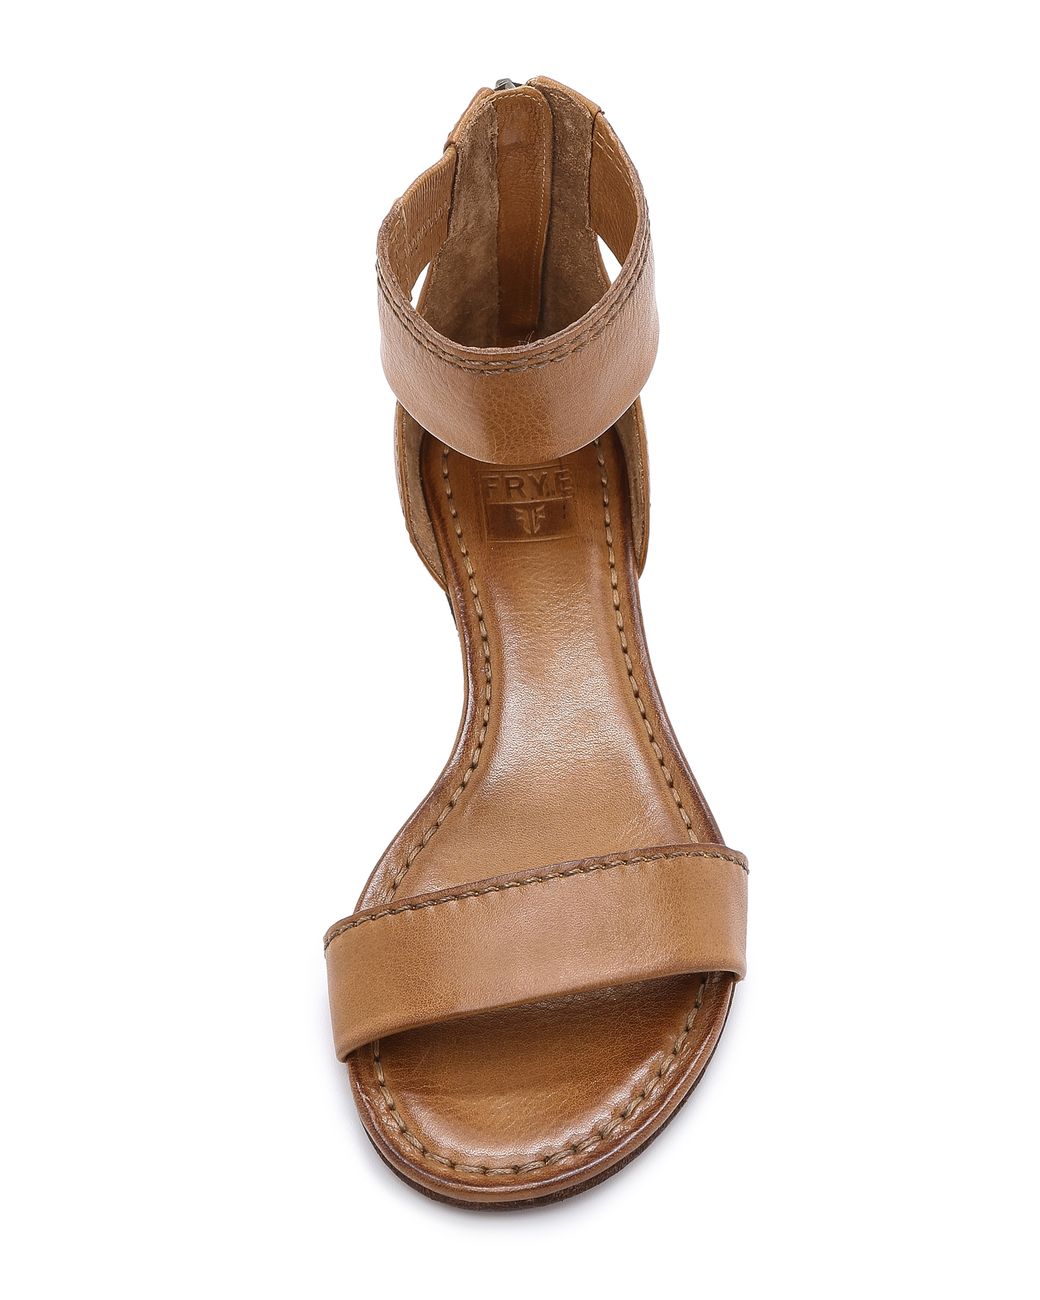 Frye Carson Ankle Zip Flat Sandals - Camel in Natural | Lyst Canada